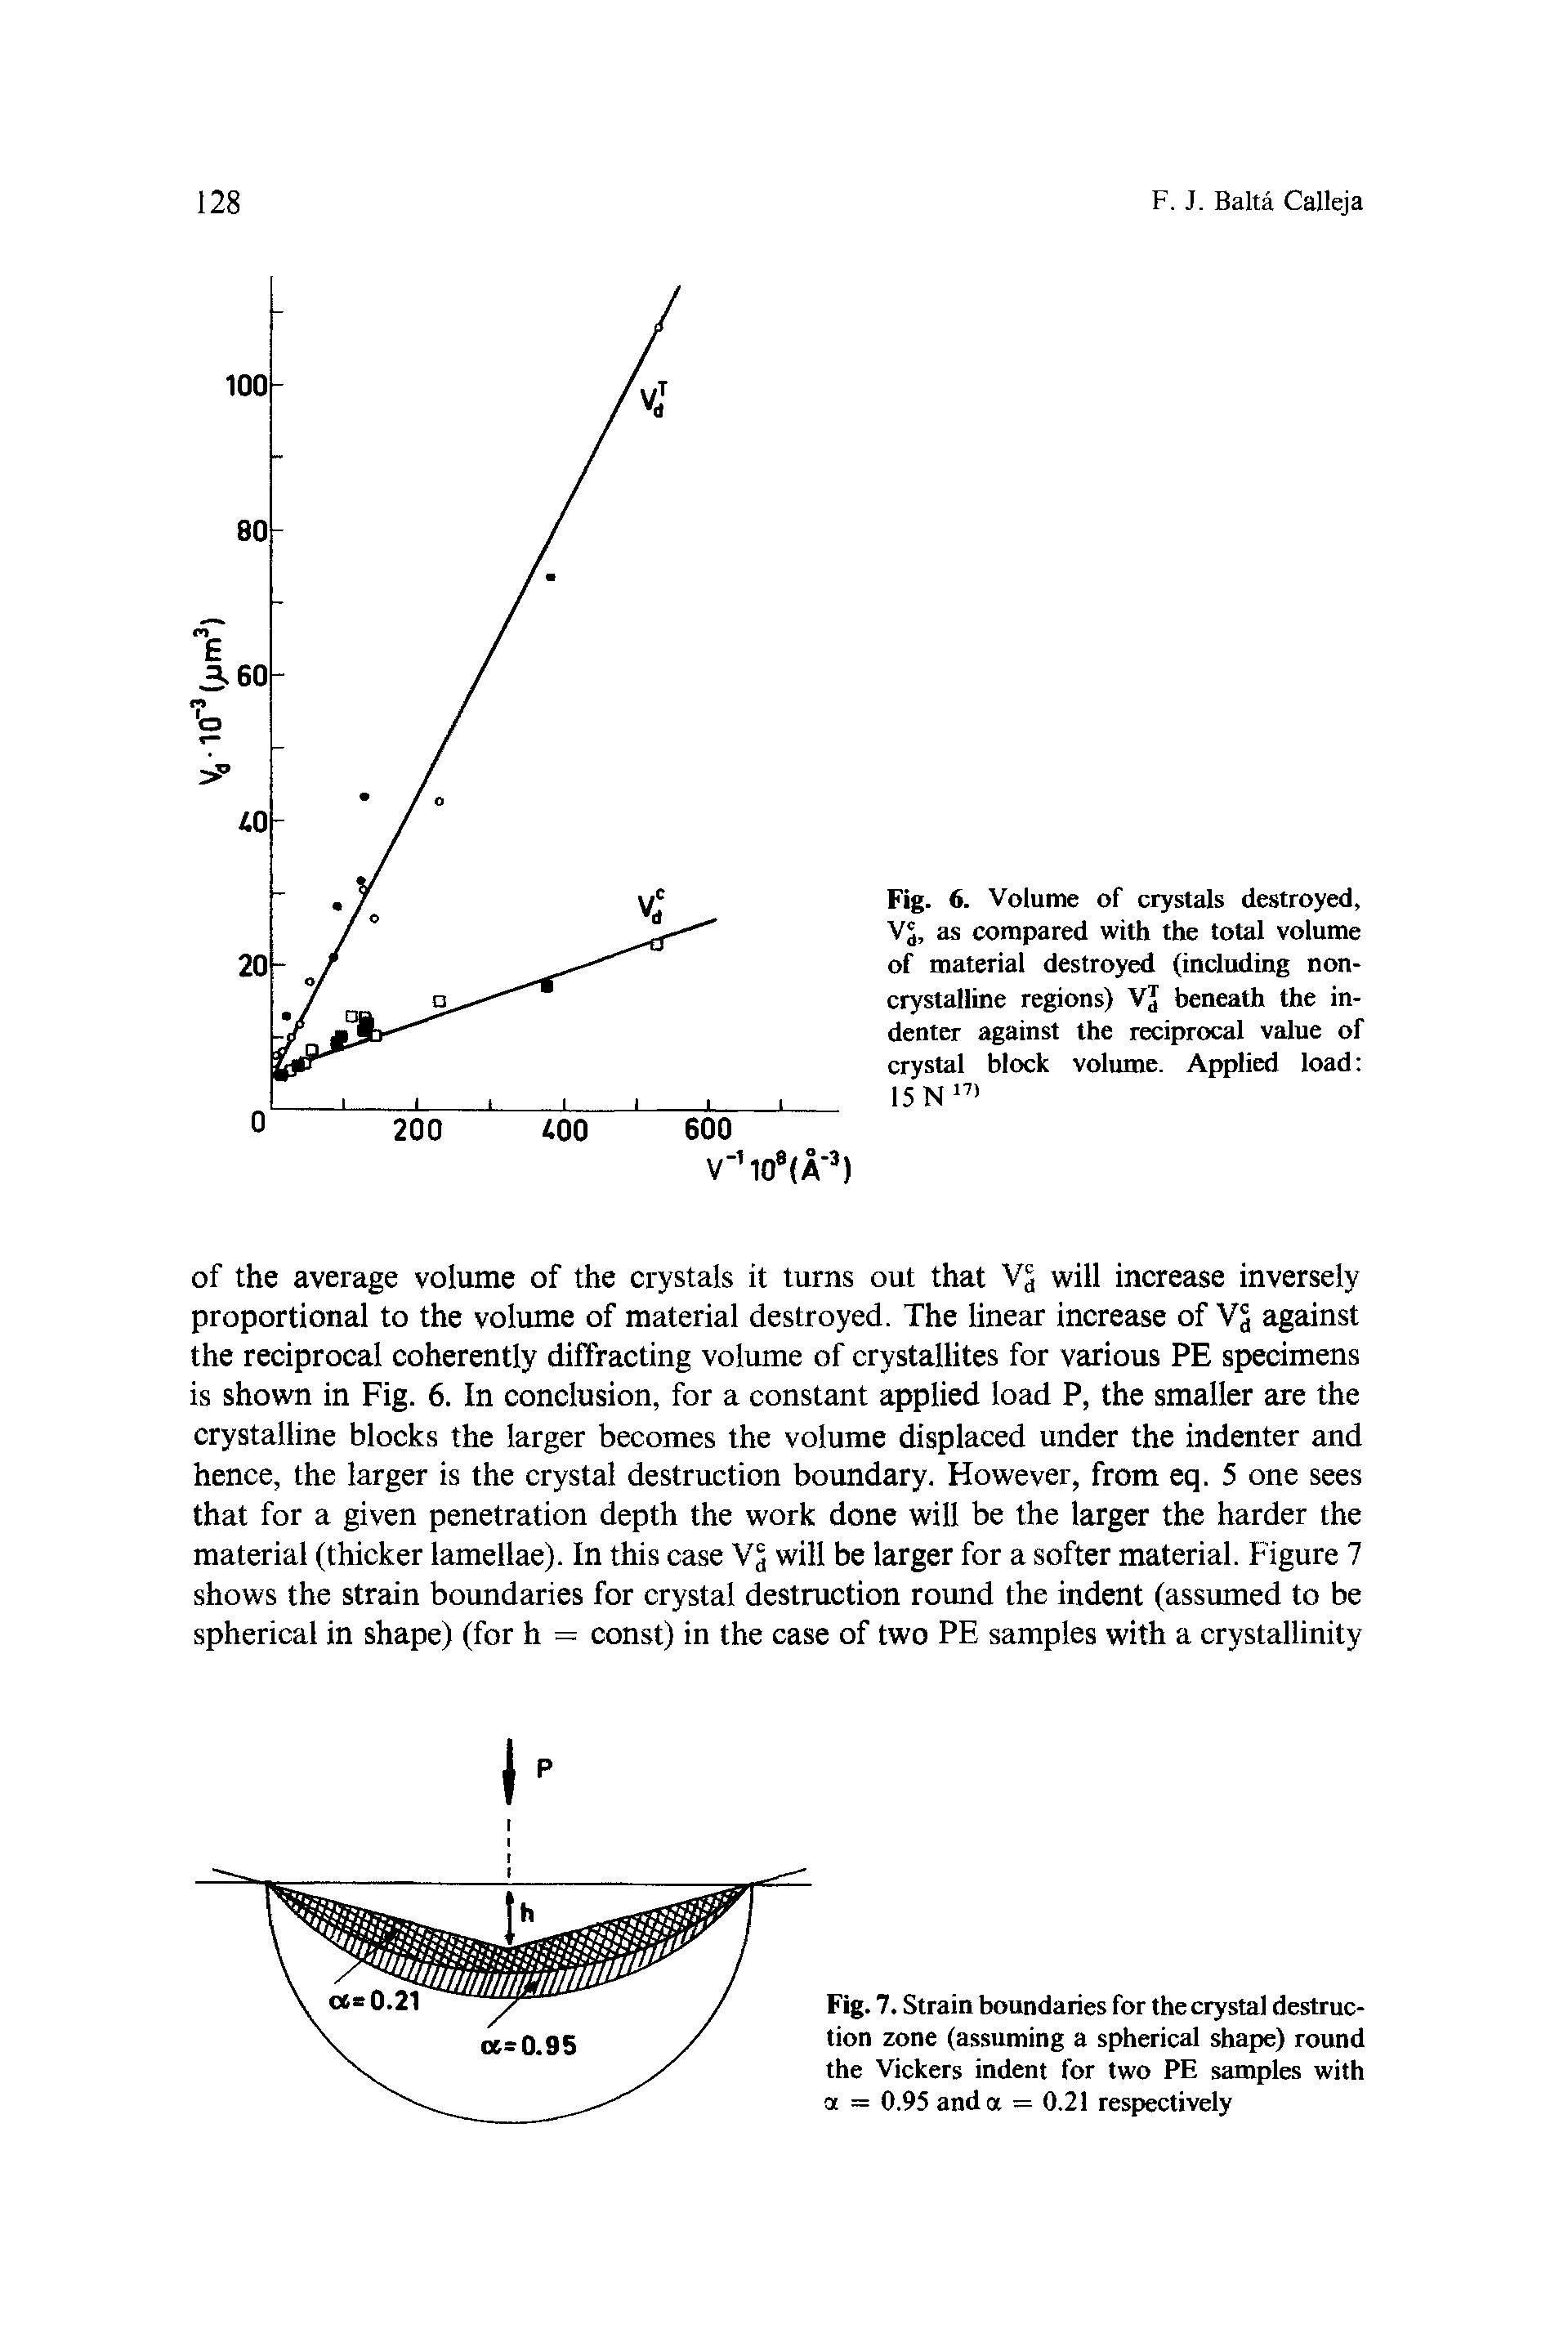 Fig. 6. Volume of crystals destroyed, VJj, as compared with the total volume of material destroyed (including non-crystalline regions) Vj beneath the in-denter against the reciprocal value of crystal block volume. Applied load 15 N 17)...